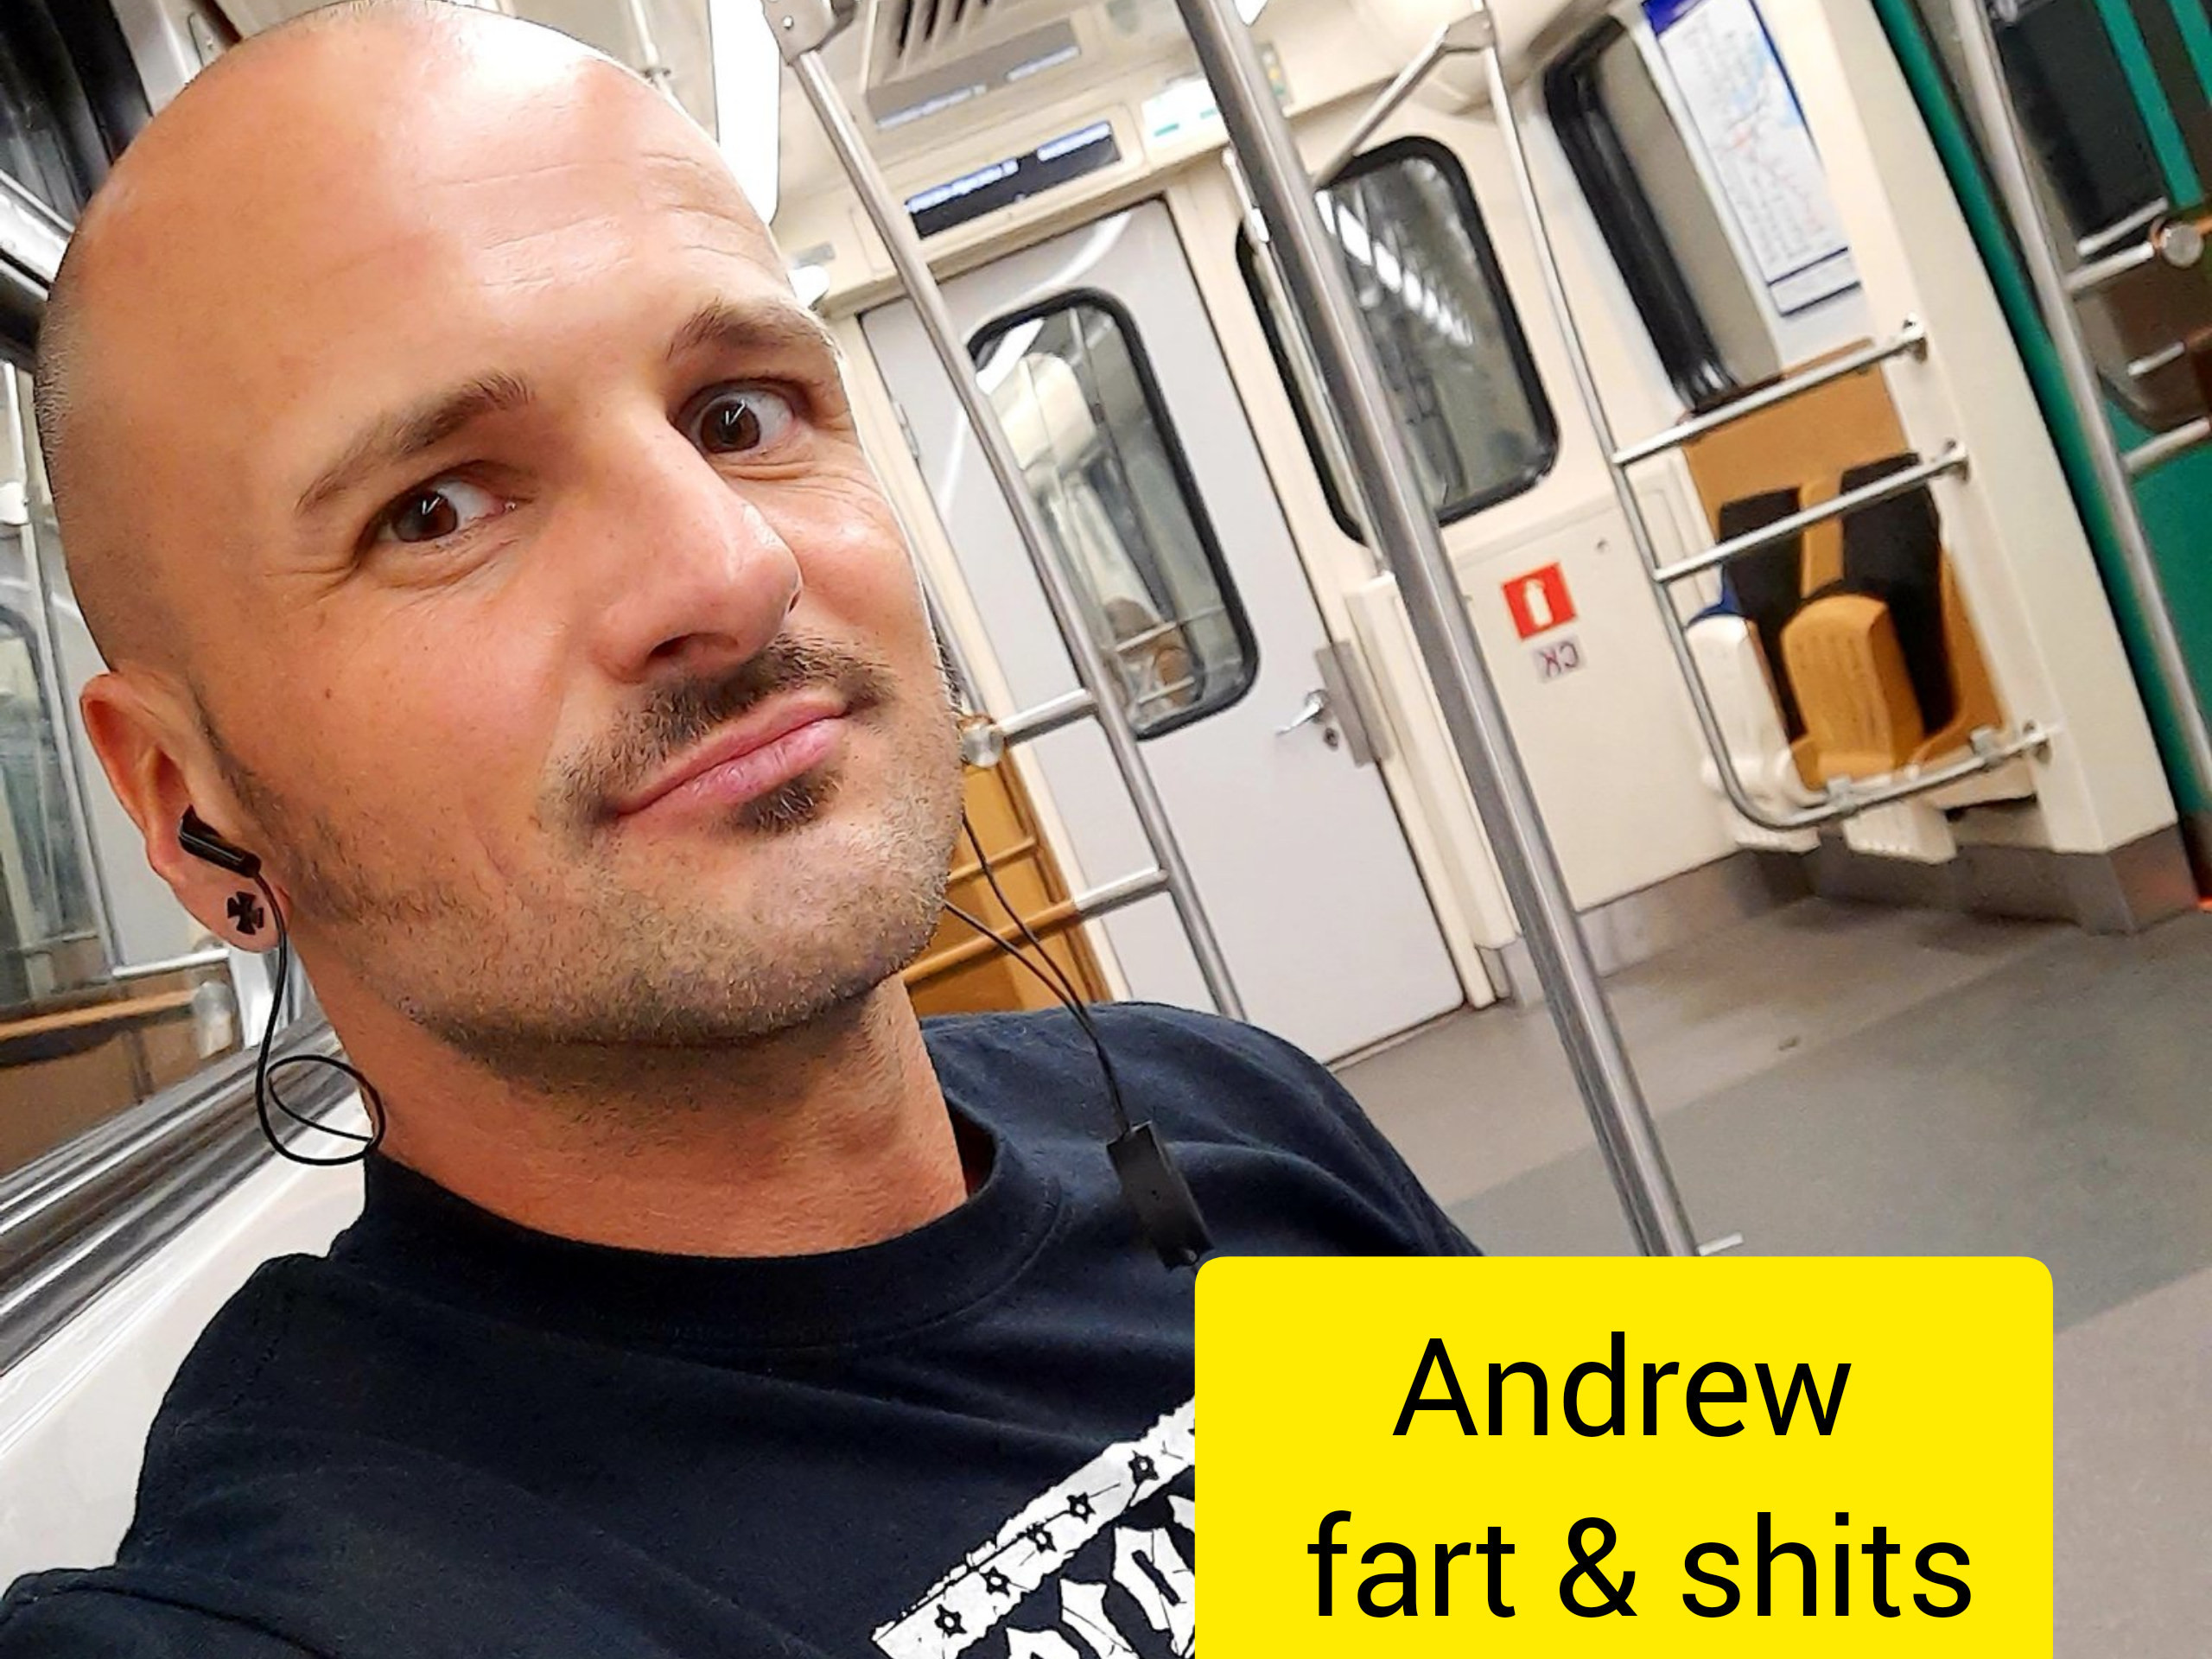 Andrew fart & poops